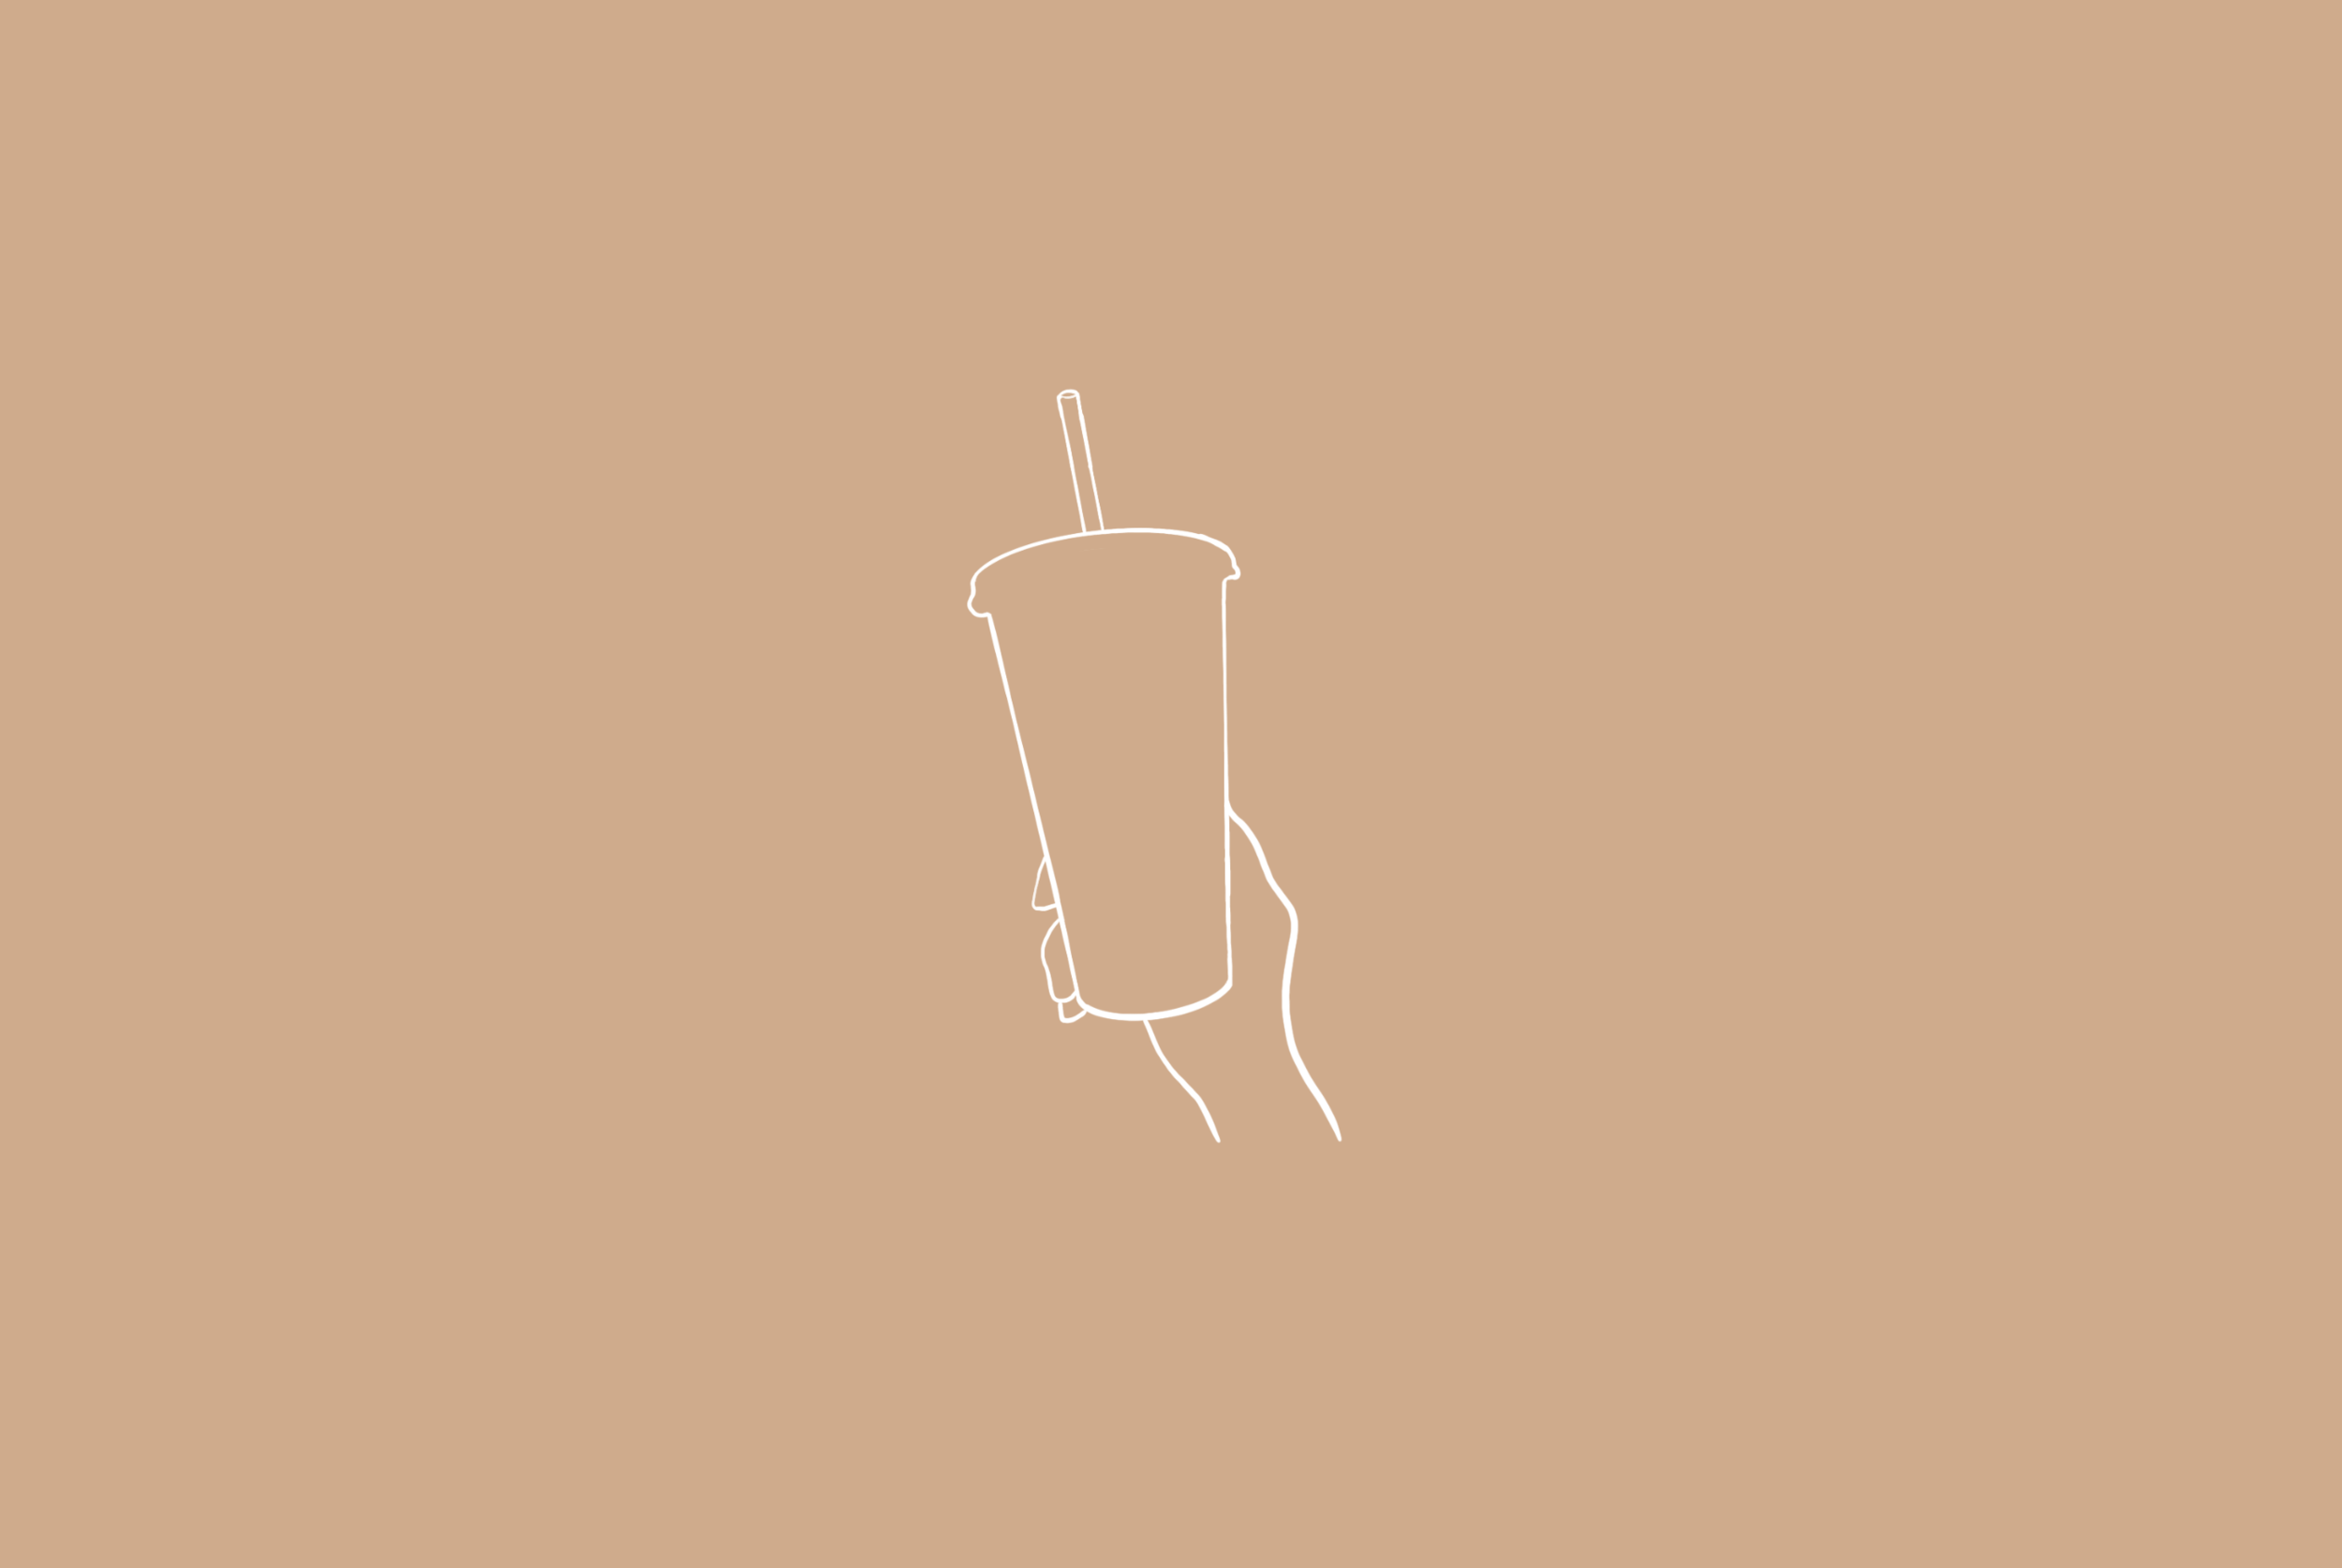 An illustration of a hand holding a drink with a straw - IMac